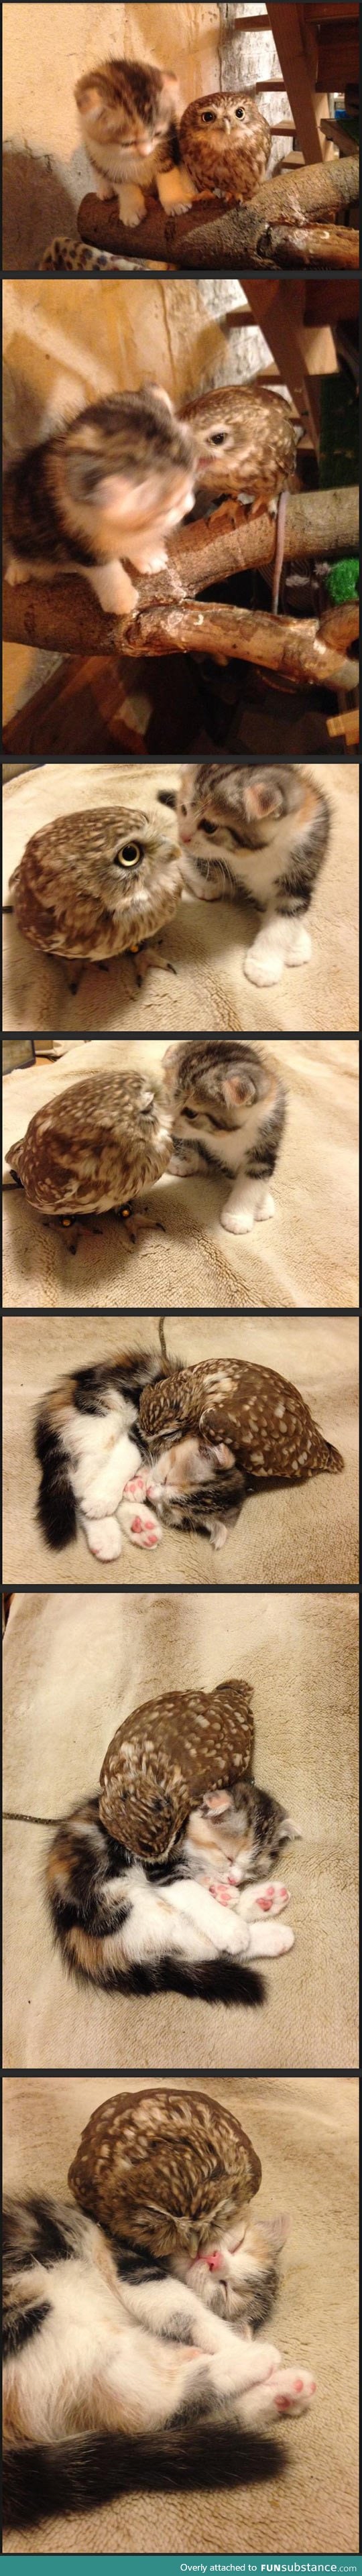 Kitten and owlet are the cutest things ever